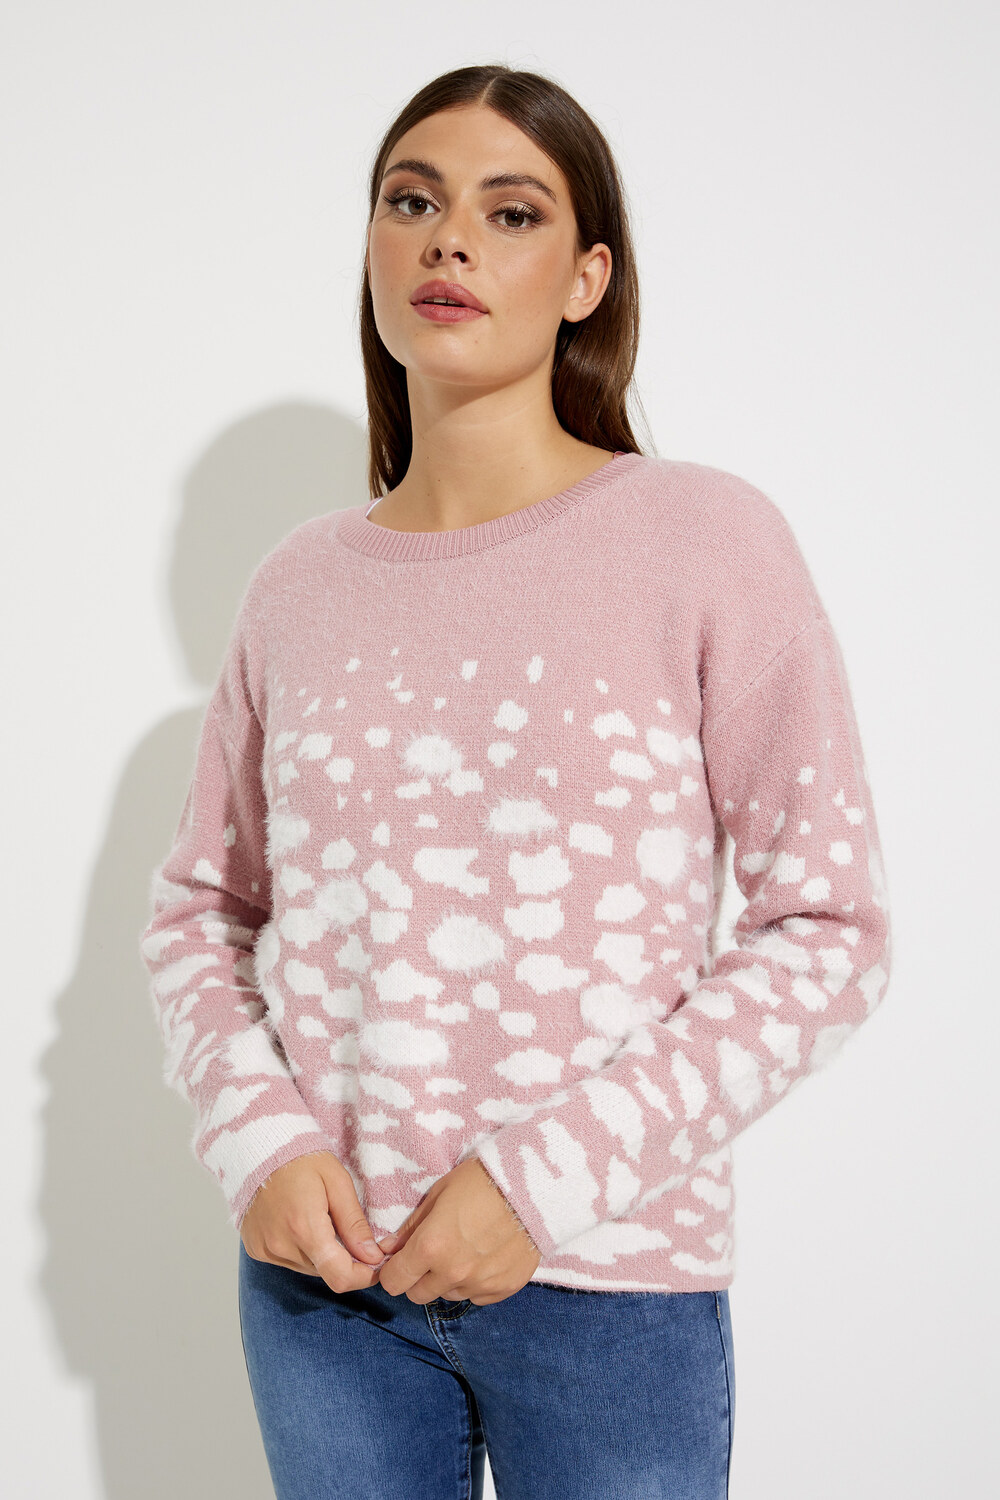 Cloud Ombre Sweater Style C2445. Zephyr